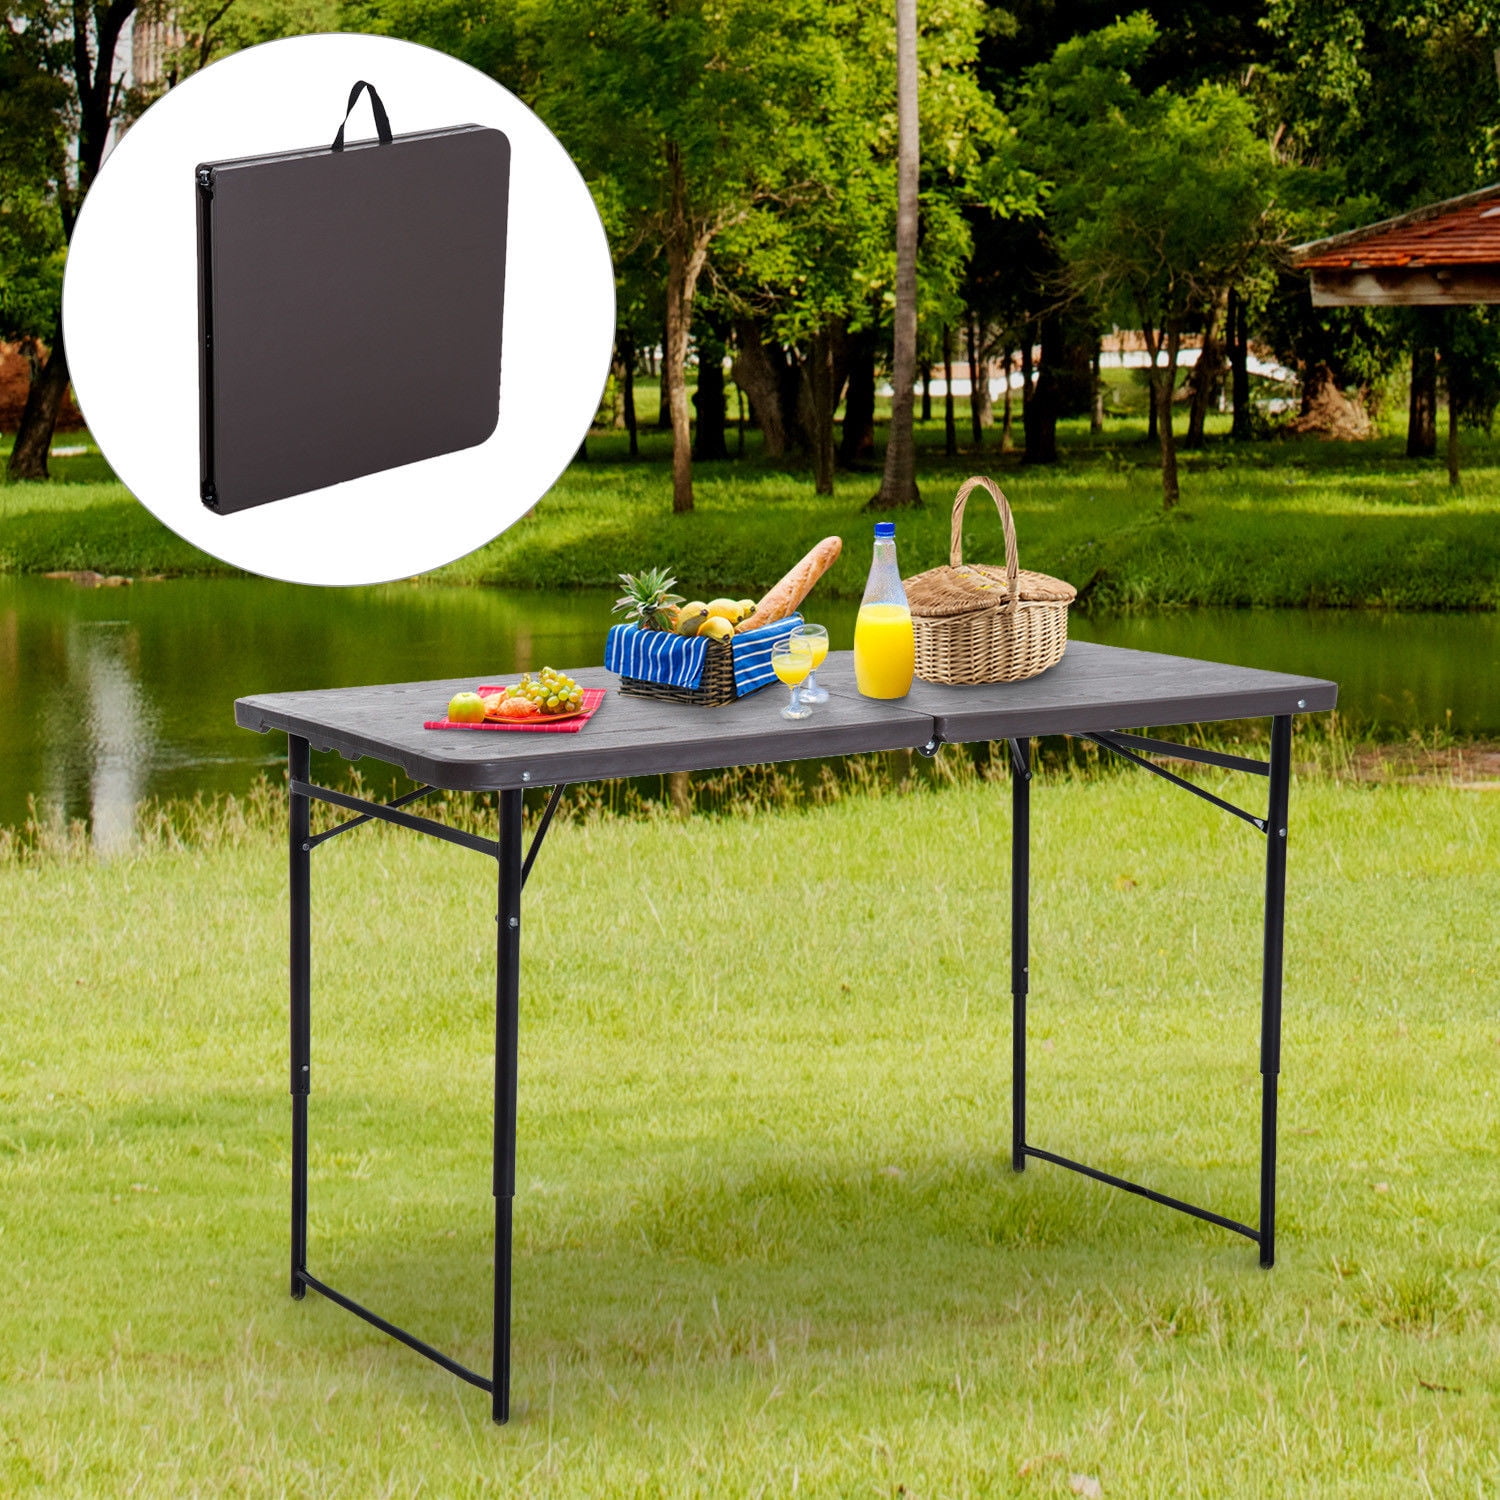 4FT Aluminum Folding Camping Table Outdoor Garden Picnic Table Adjustable Height 